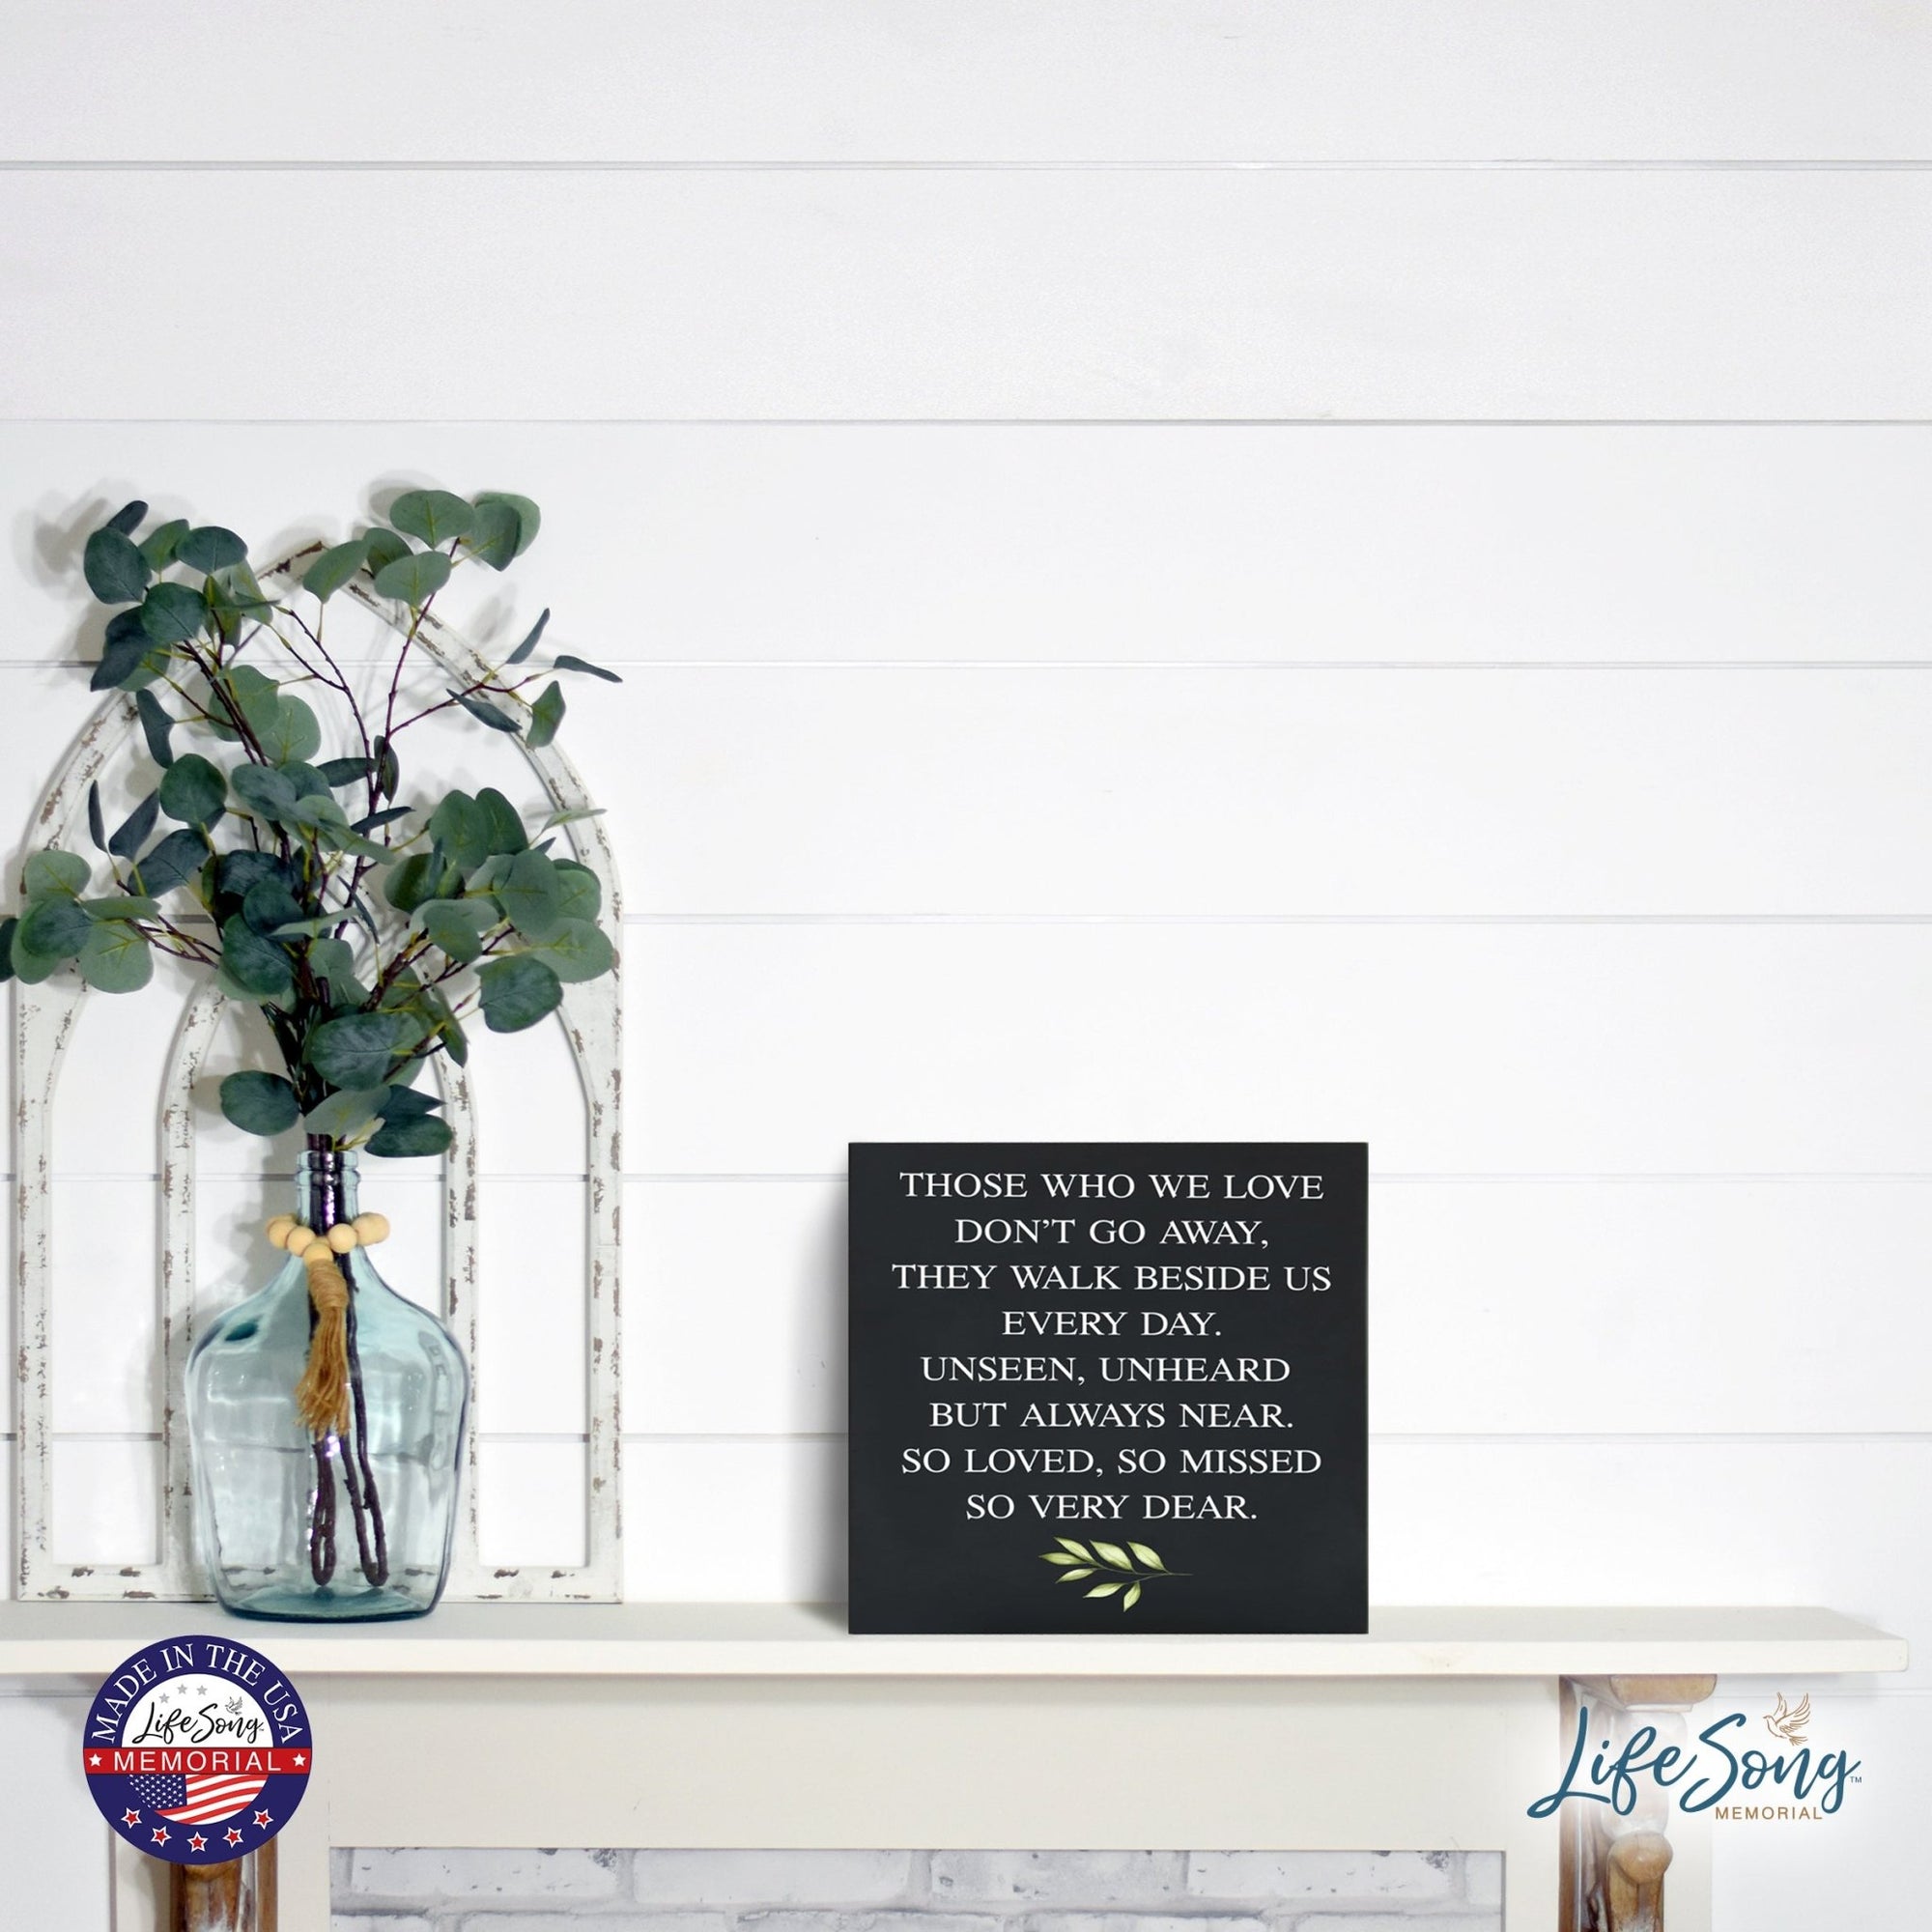 Memorial Bereavement Keepsake Cremation Shadow Box and Urn 6x6in Holds 53 Cu Inches Of Human Ashes Those Who We Love - LifeSong Milestones